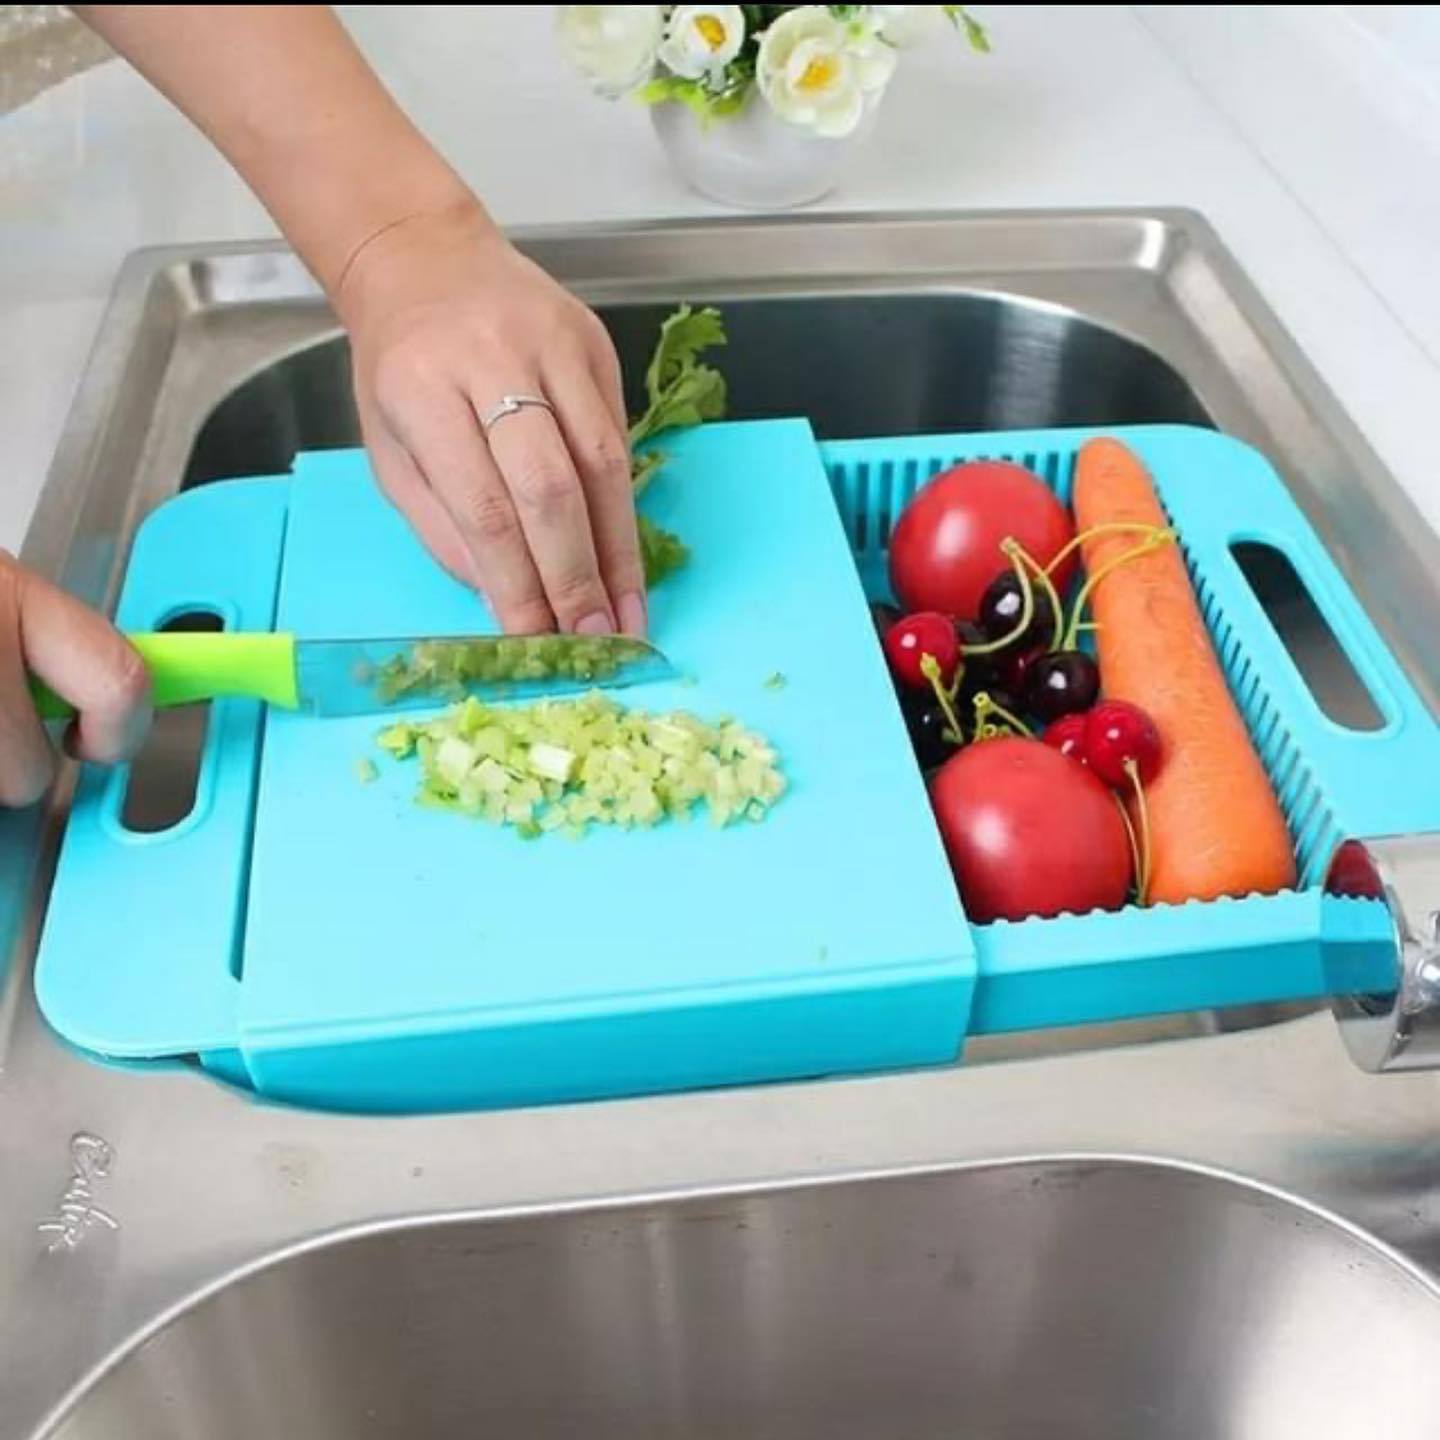 Chop - N - Store Cutting Chopping Board with Tray & Strainers (Multi Color)